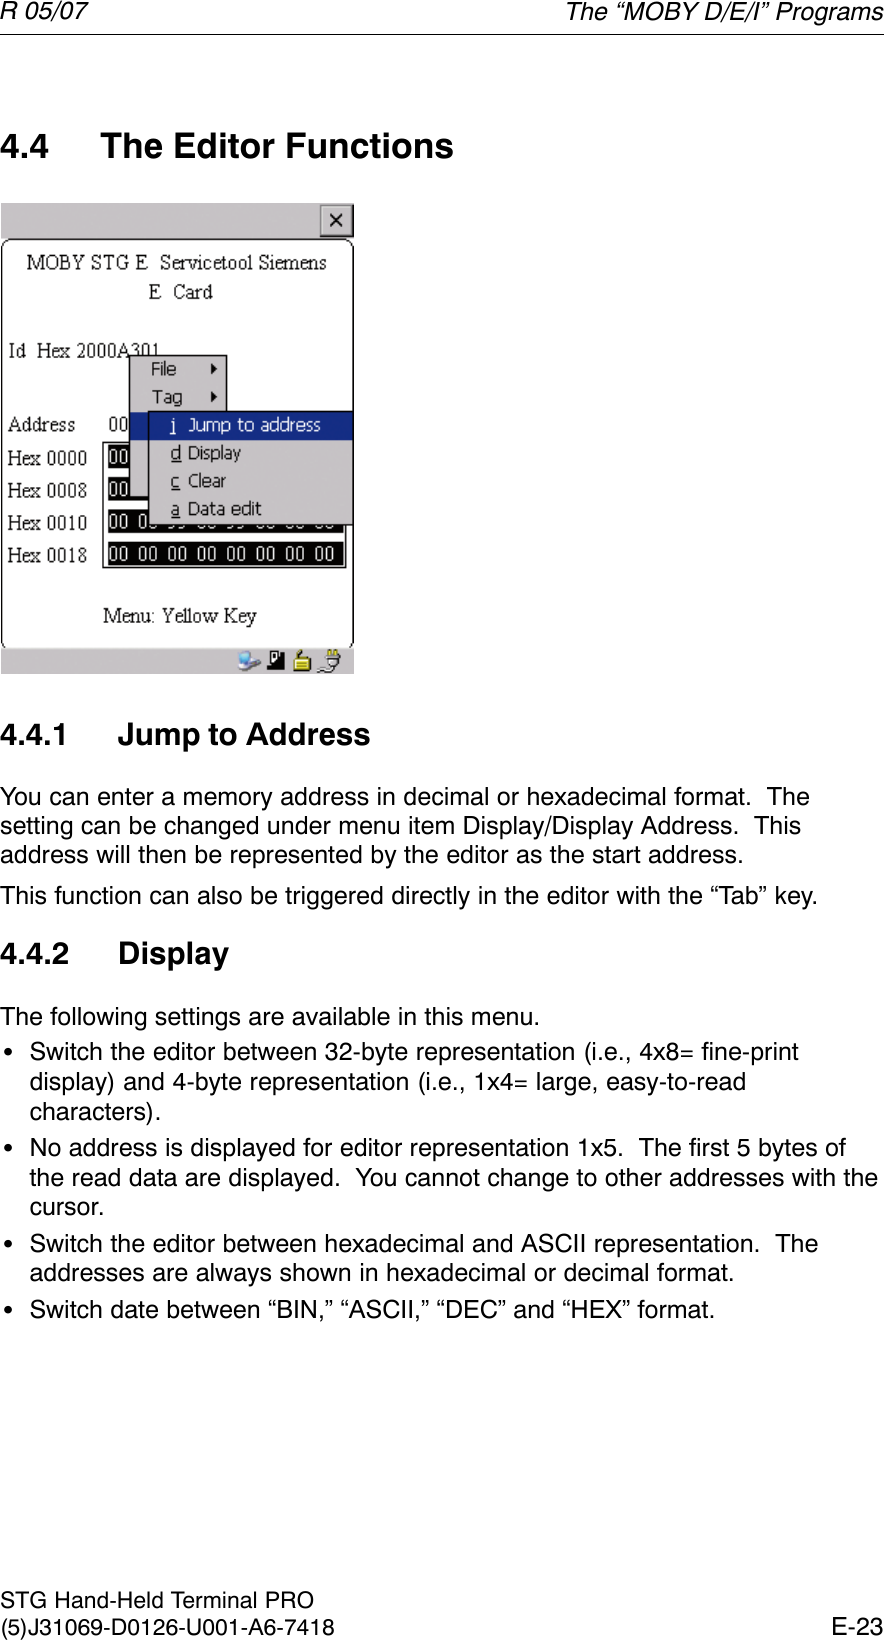 R 05/07E-23STG Hand-Held Terminal PRO(5)J31069-D0126-U001-A6-74184.4 The Editor Functions4.4.1 Jump to AddressYou can enter a memory address in decimal or hexadecimal format.  Thesetting can be changed under menu item Display/Display Address.  Thisaddress will then be represented by the editor as the start address.This function can also be triggered directly in the editor with the “Tab” key.4.4.2 DisplayThe following settings are available in this menu.SSwitch the editor between 32-byte representation (i.e., 4x8= fine-printdisplay) and 4-byte representation (i.e., 1x4= large, easy-to-readcharacters).SNo address is displayed for editor representation 1x5.  The first 5 bytes ofthe read data are displayed.  You cannot change to other addresses with thecursor.SSwitch the editor between hexadecimal and ASCII representation.  Theaddresses are always shown in hexadecimal or decimal format.SSwitch date between “BIN,” “ASCII,” “DEC” and “HEX” format.The “MOBY D/E/I” Programs